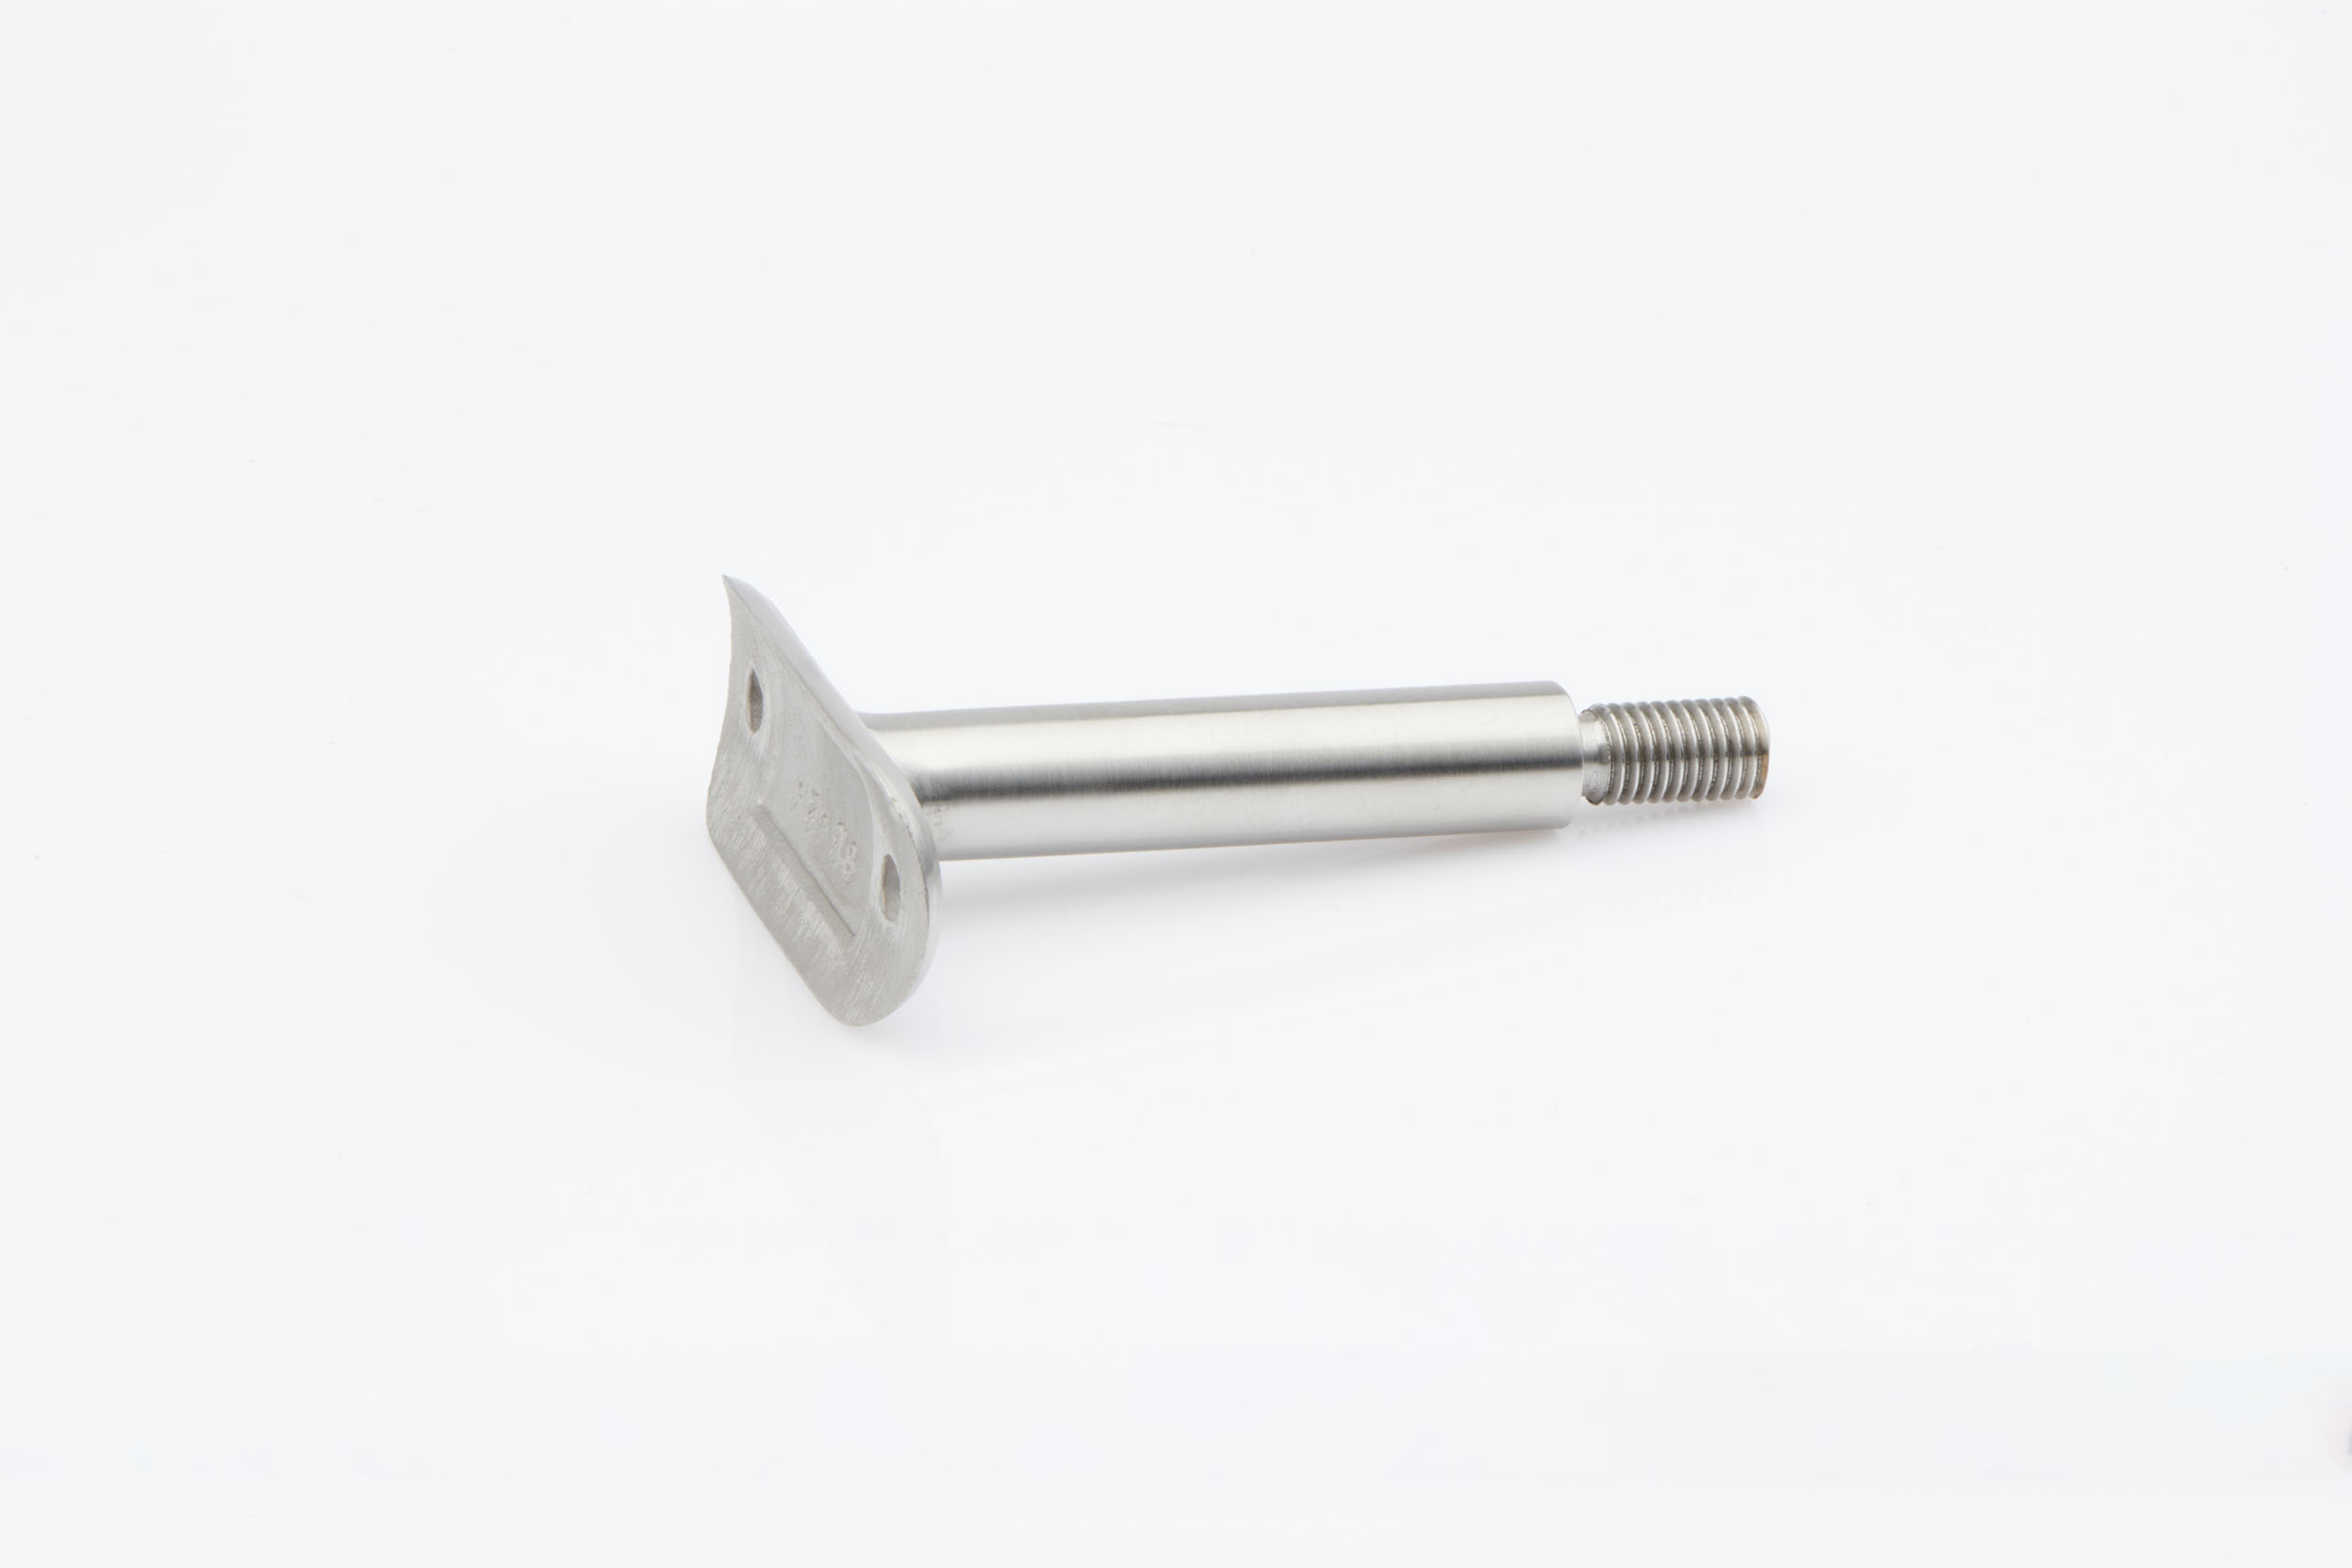 Handrail Stem With Thread - Fixed Saddle for 42.4mm Handrail